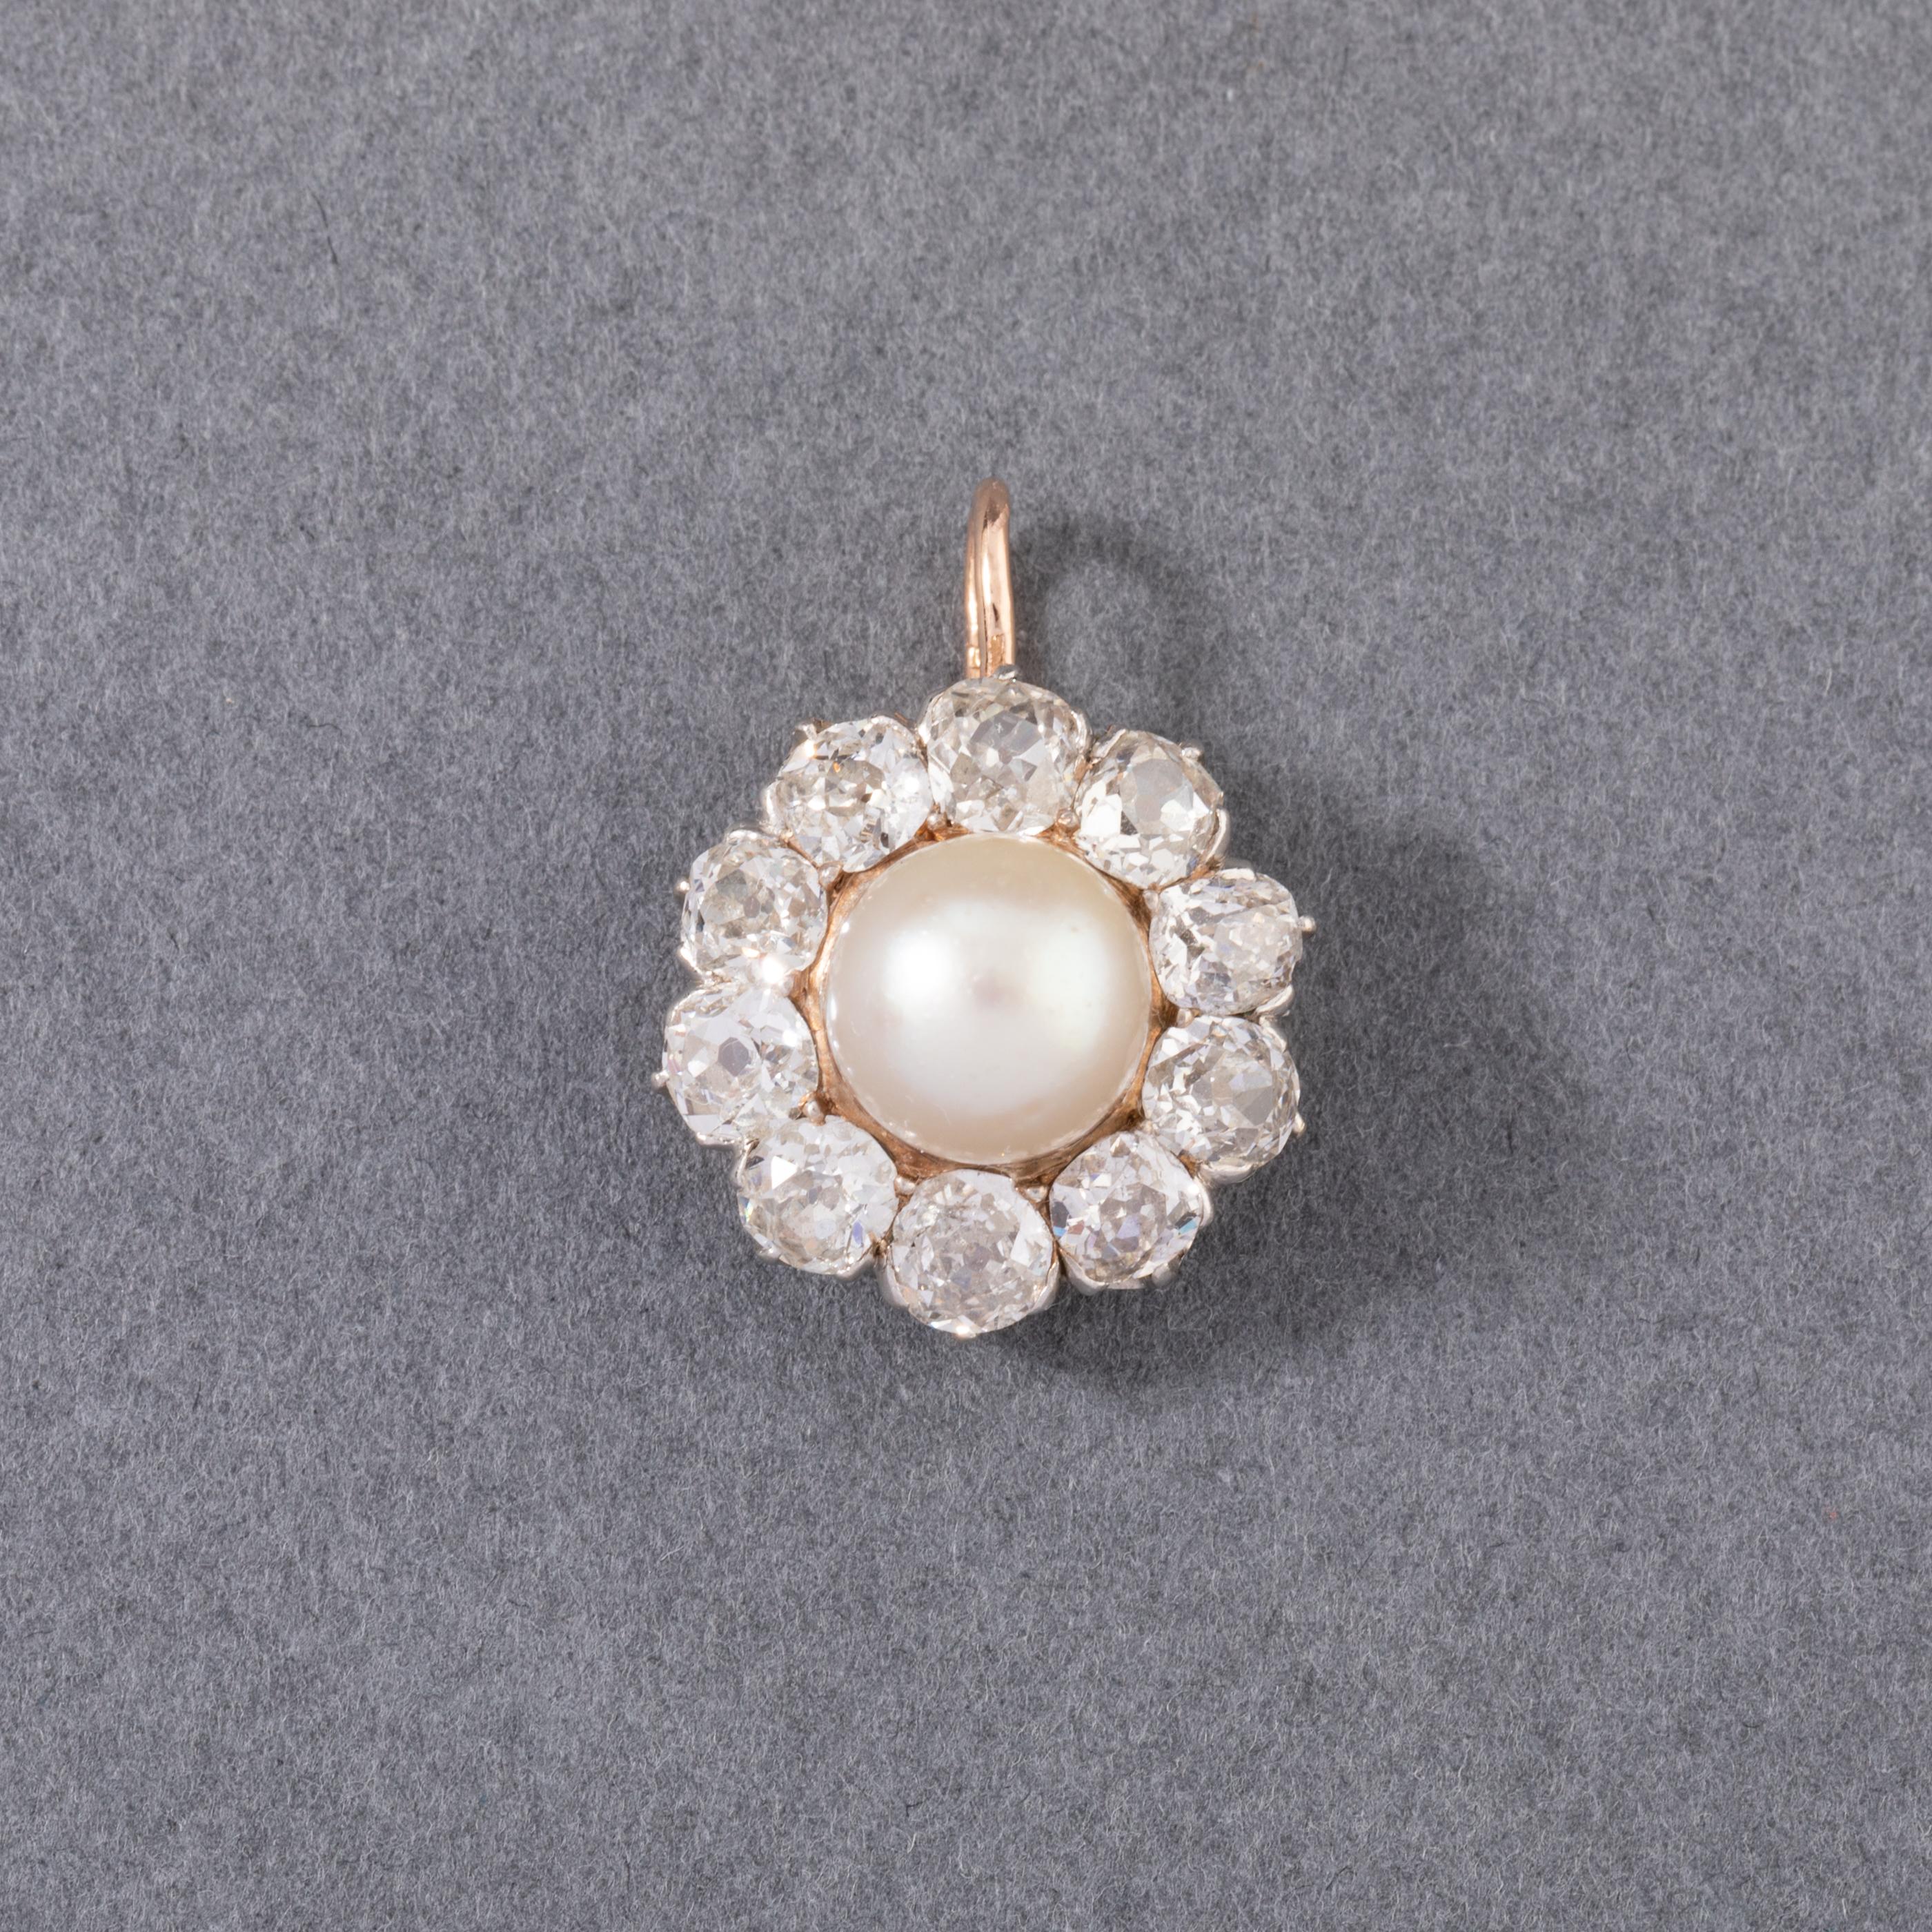 One beautiful antique pendant, made in France circa 1900.
Made in rose gold 18k and set with 2 carats of quality old European cut diamonds.
The cluster has a diameter of 15mm. The pearl measures 6.5 mm diameter.
Total weight: 7 grams